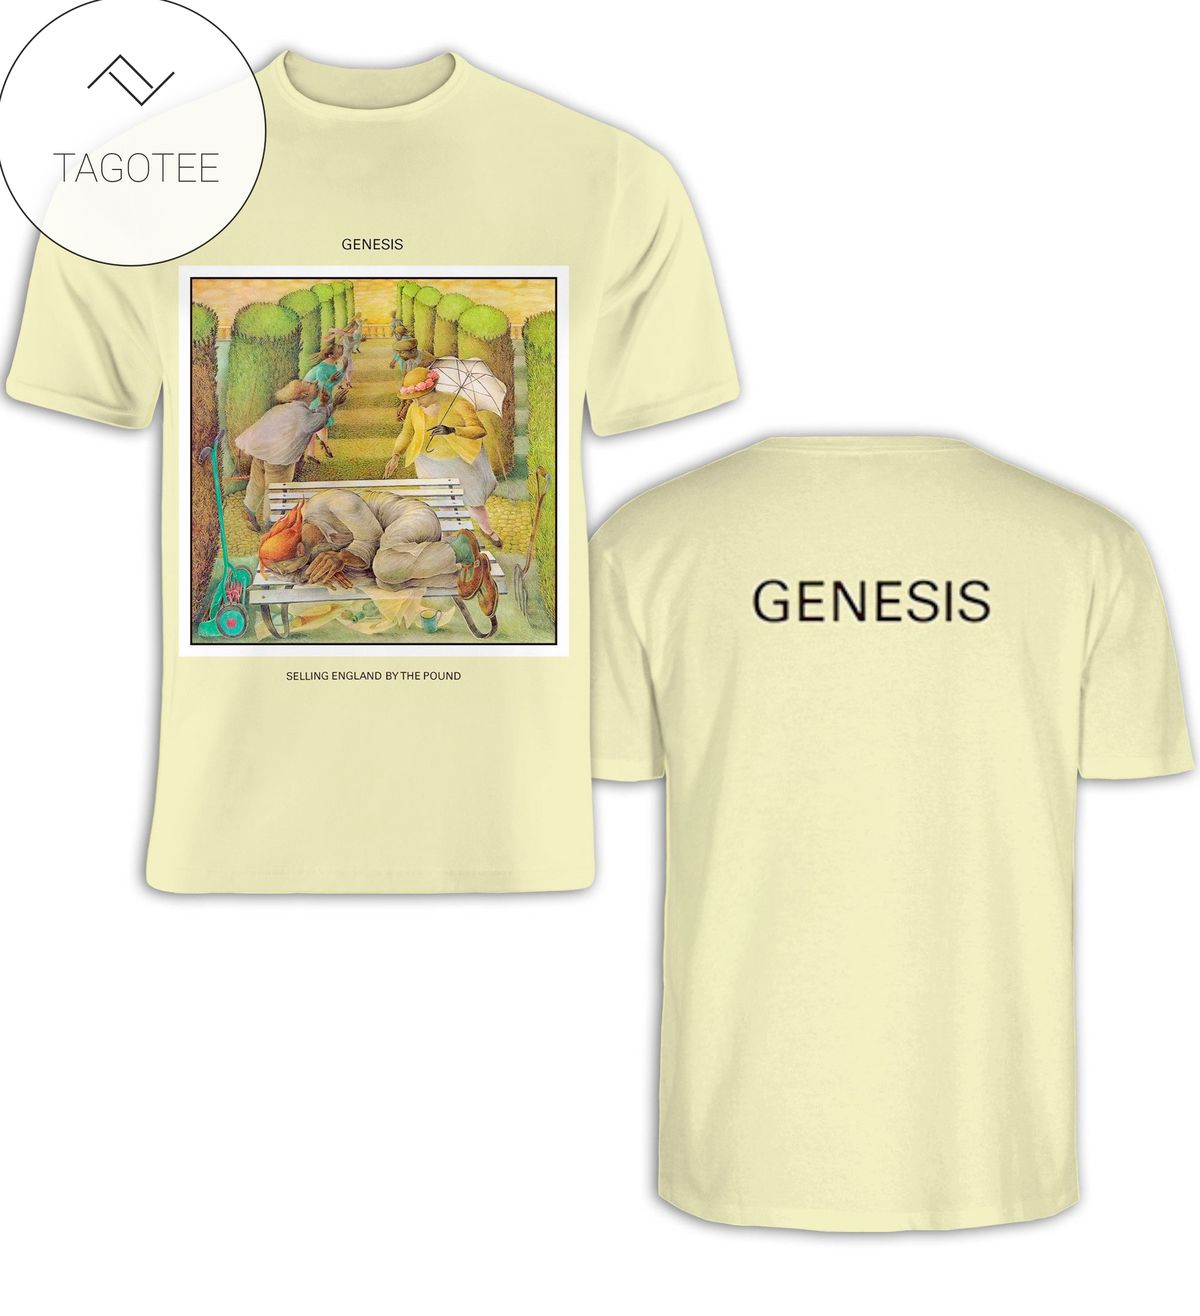 Selling England By The Pound Album By Genesis Shirt